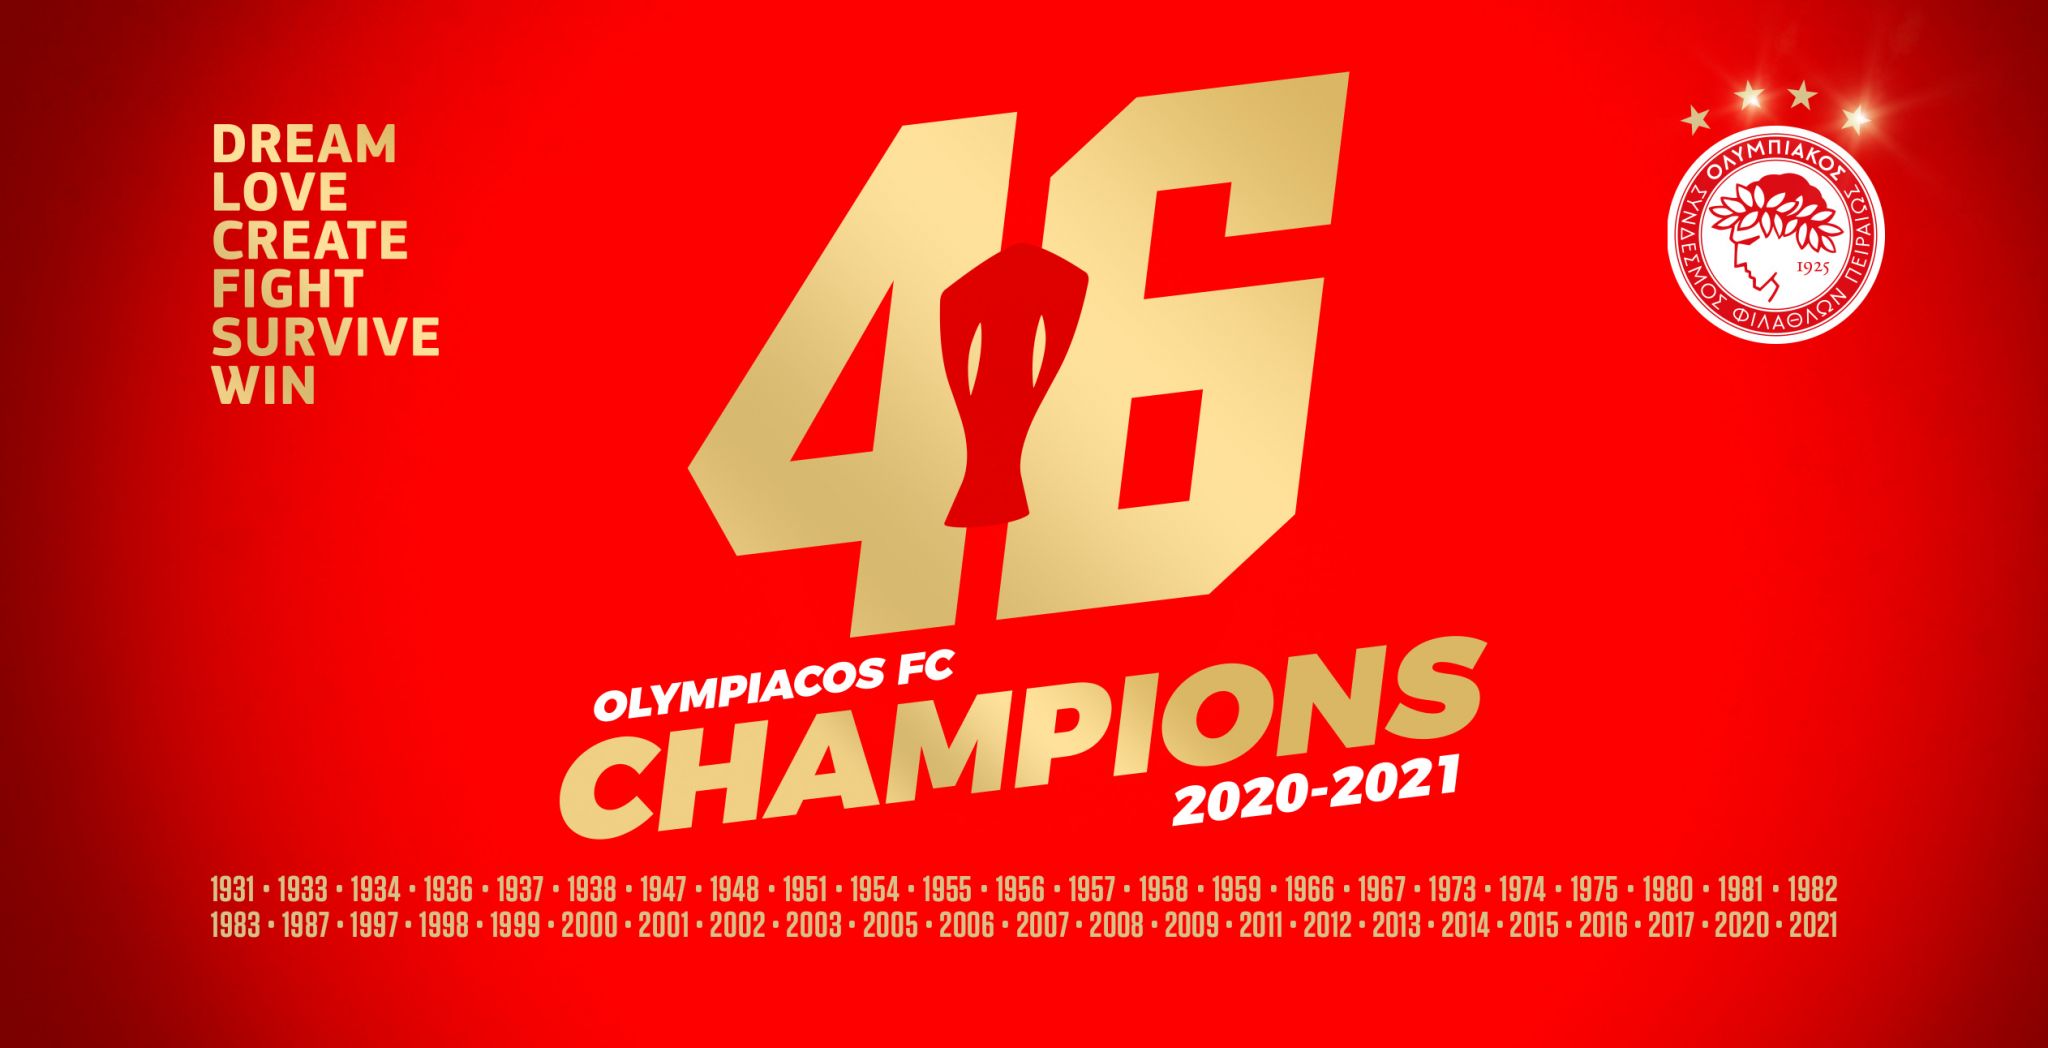 Olympiacos_46_Championships_2021_2525x12